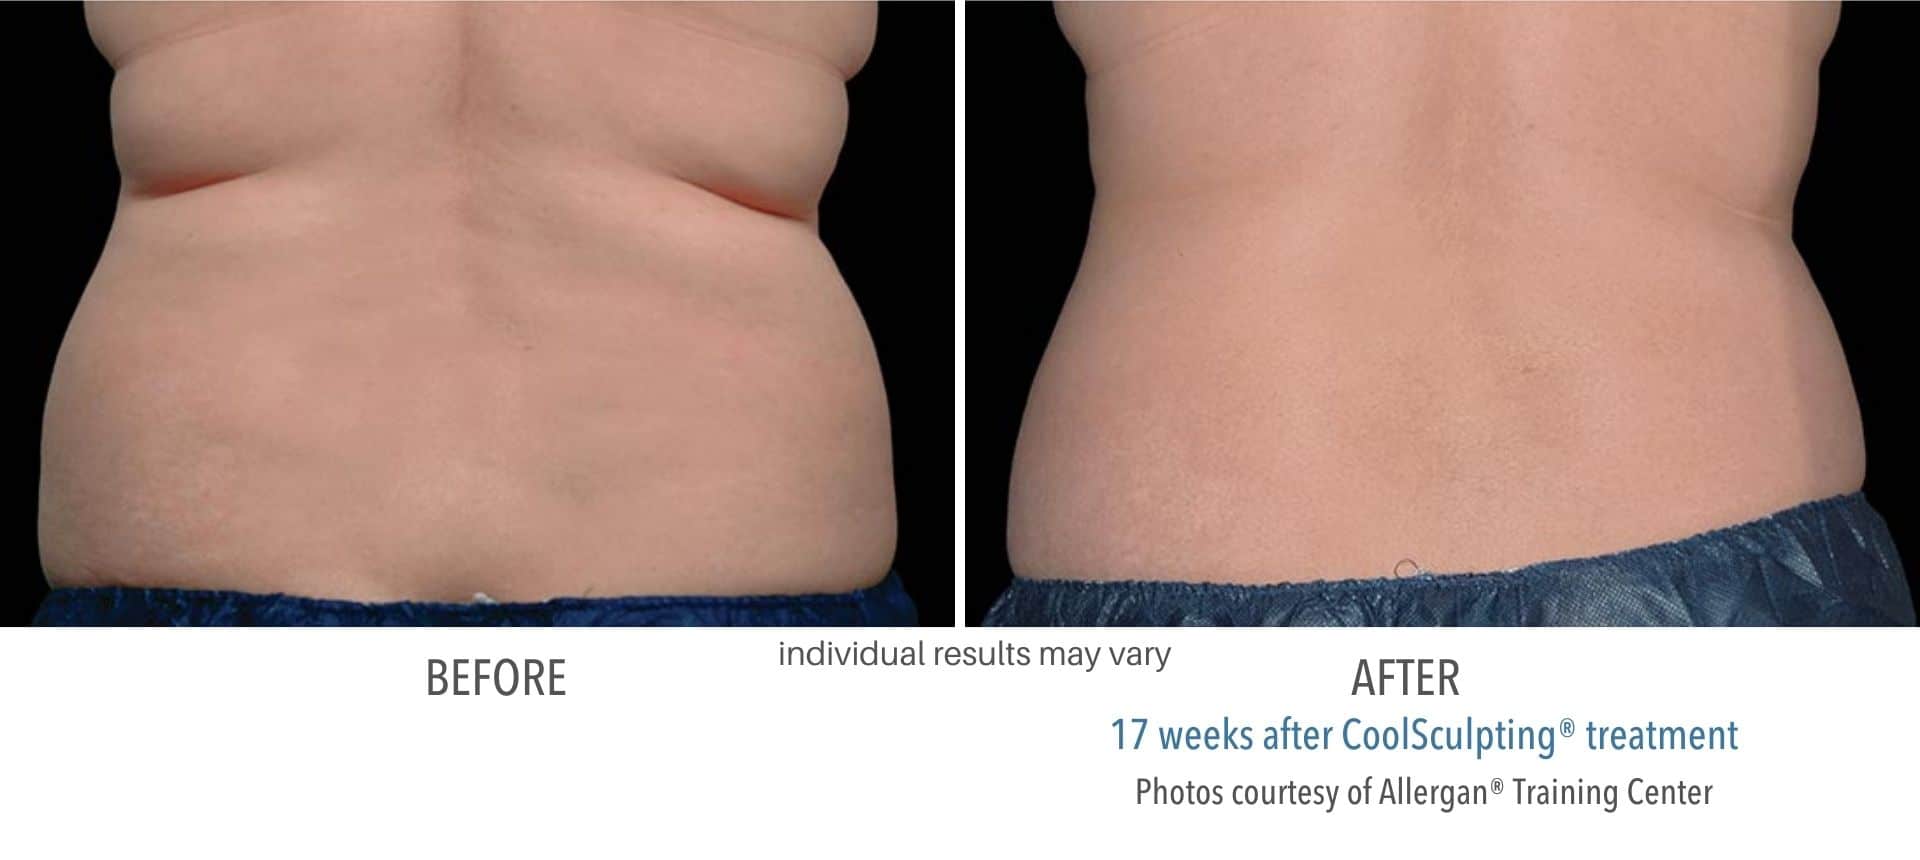 CoolSculpting back fat treatment before and after